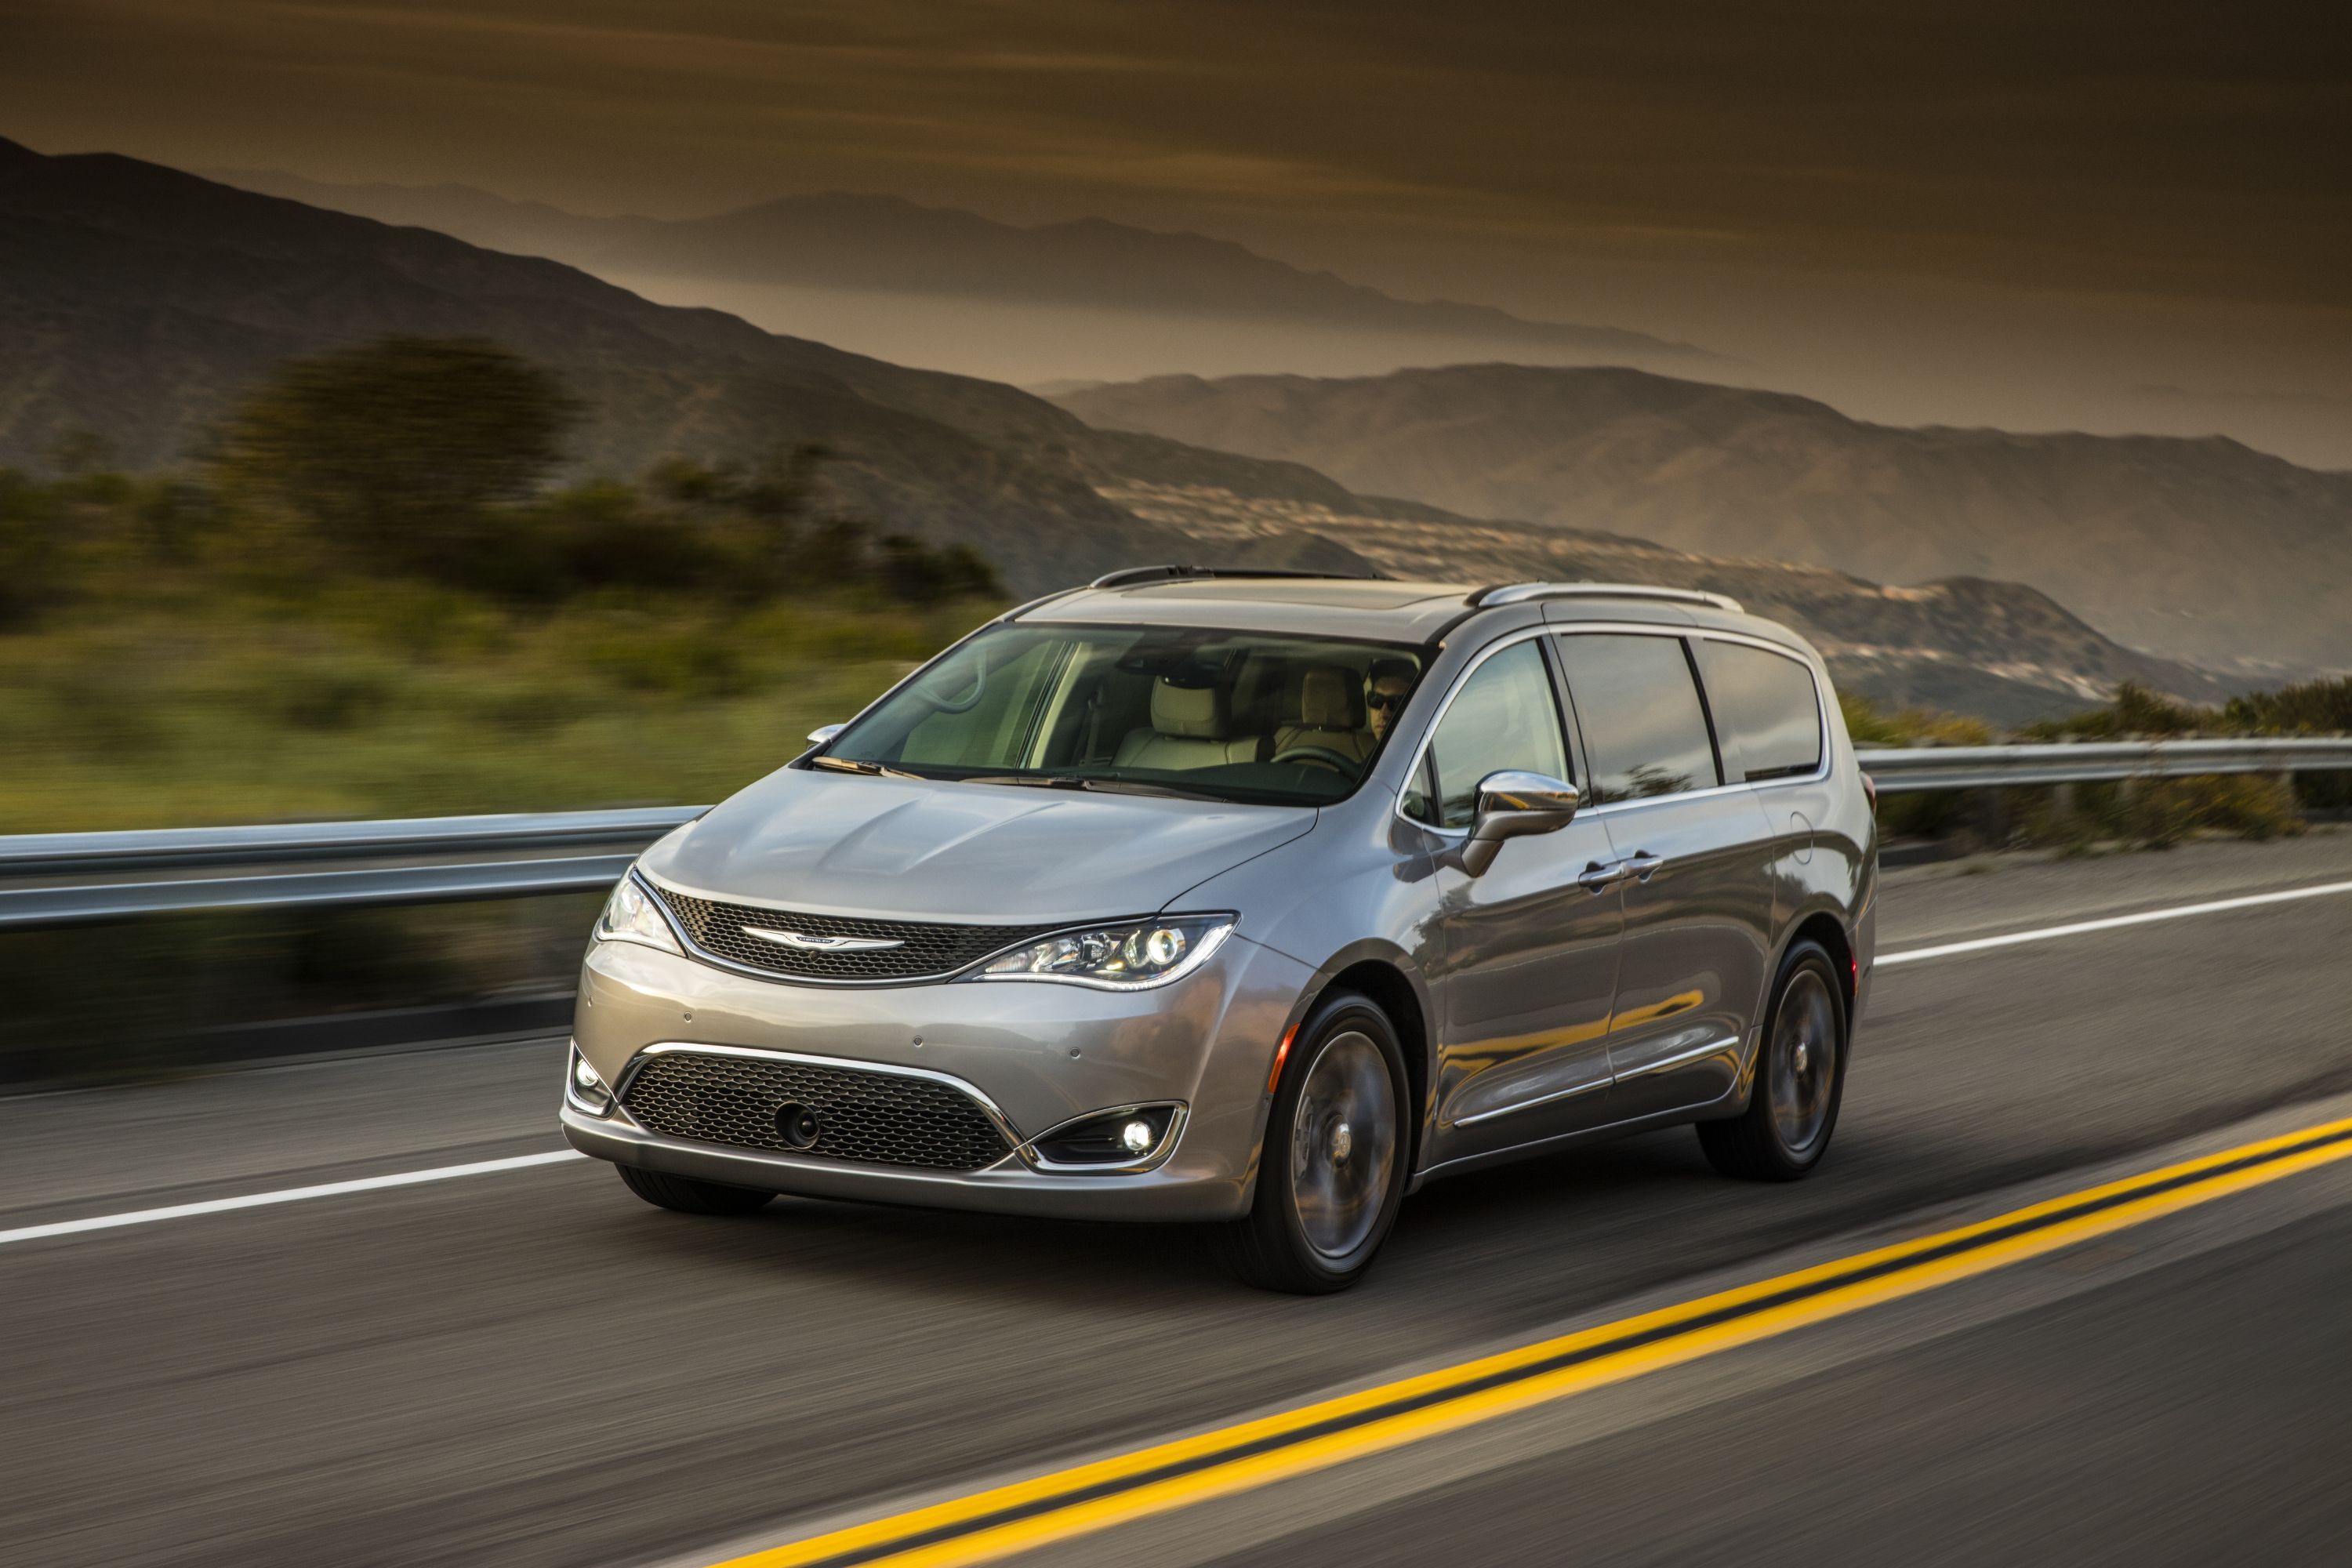 2020 Chrysler Pacifica Review, Pricing 